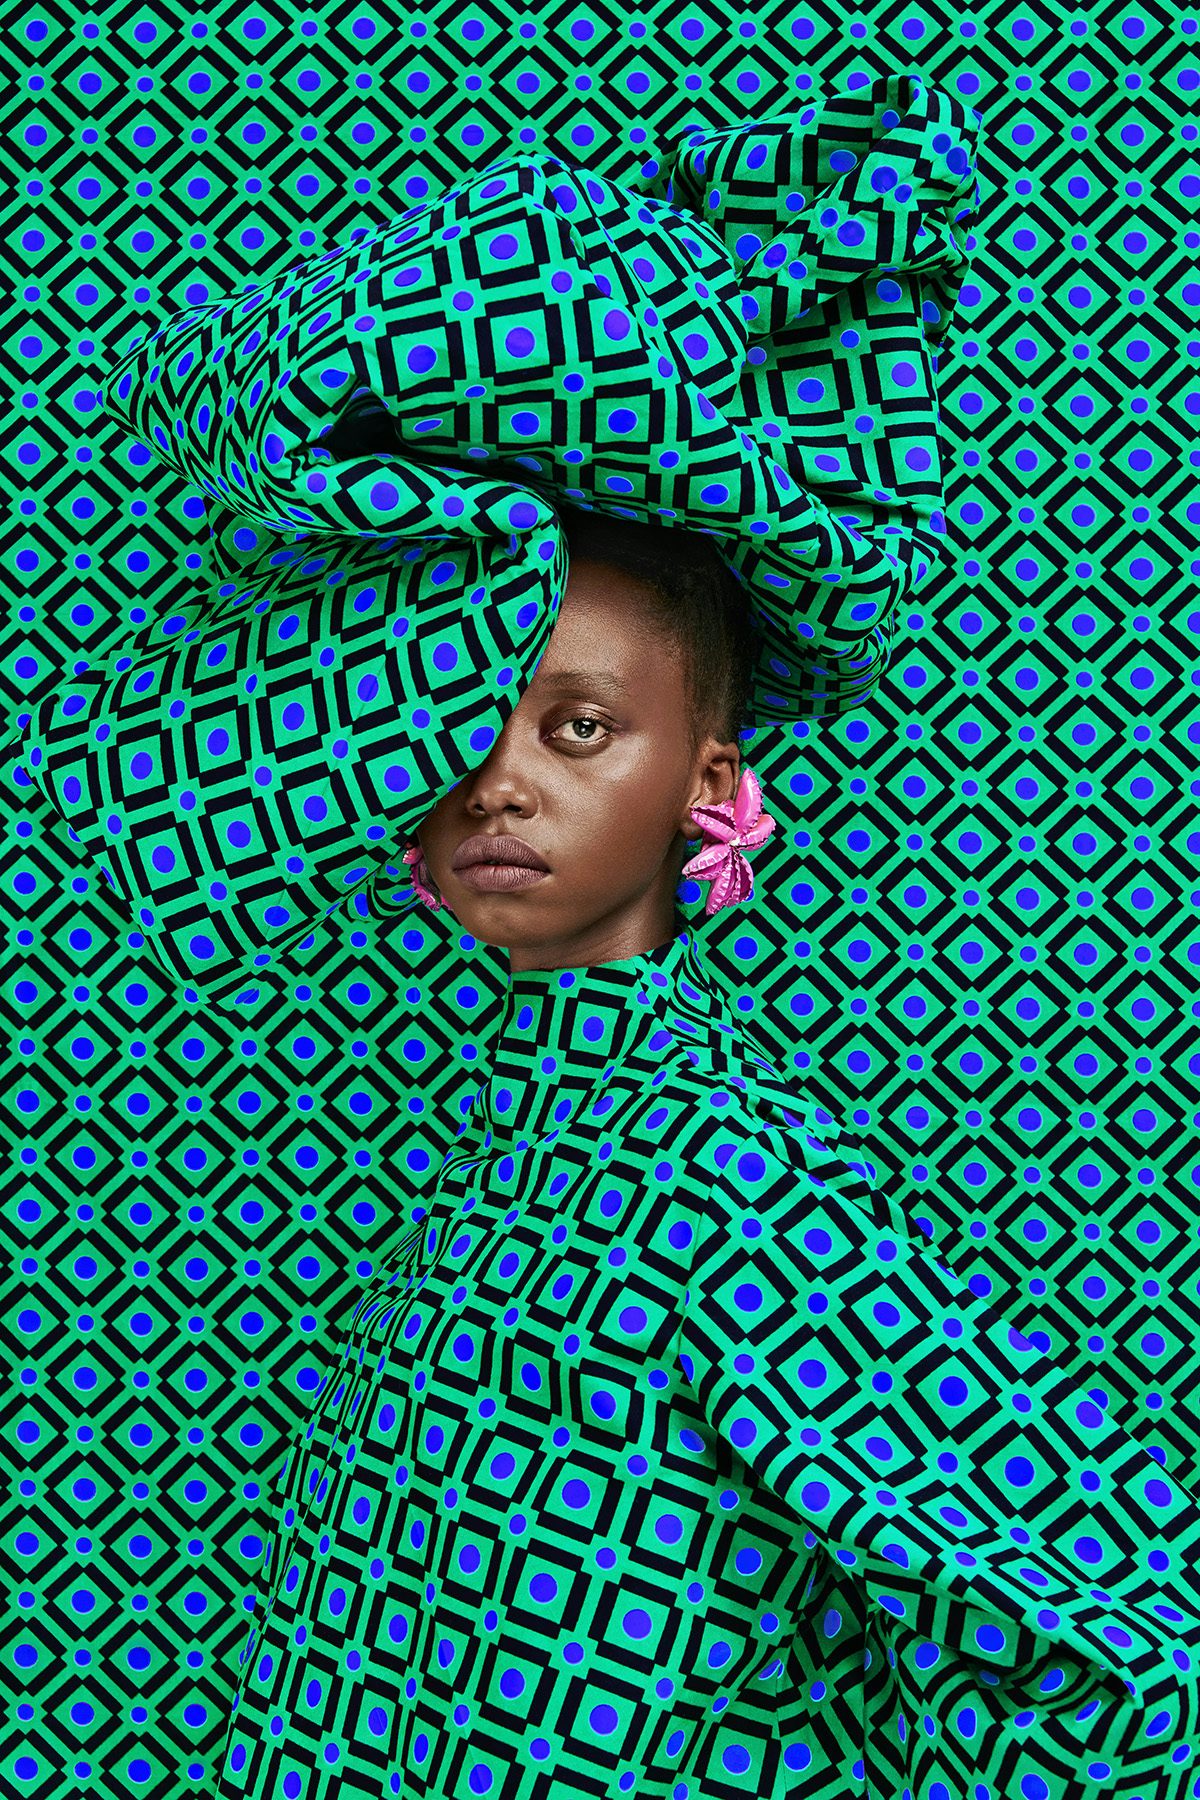 A woman wearing a headdress and garment in a green, blue and black square pattern, which blends into a backdrop in the same pattern